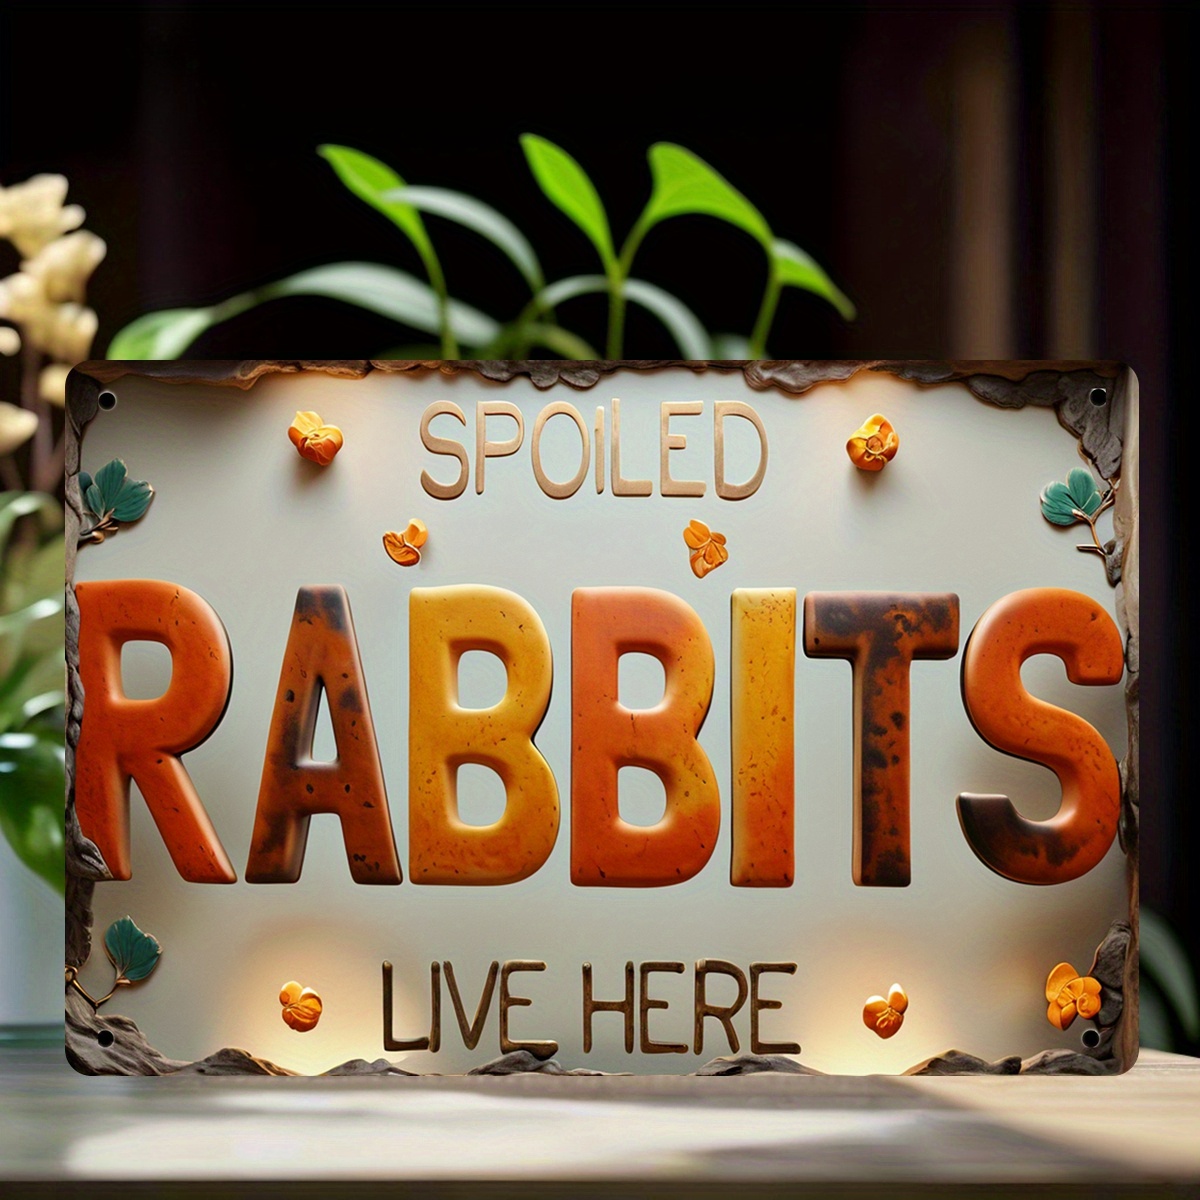 

Vintage Metal Tin Sign - Spoiled Rabbits Live Here - Colorful Painted Wall Art Decor For Home, Bedroom, Patio, Cafe, Man Cave, Bar, Office, Club - No Electricity Required, No Feathers, Seasonal Décor